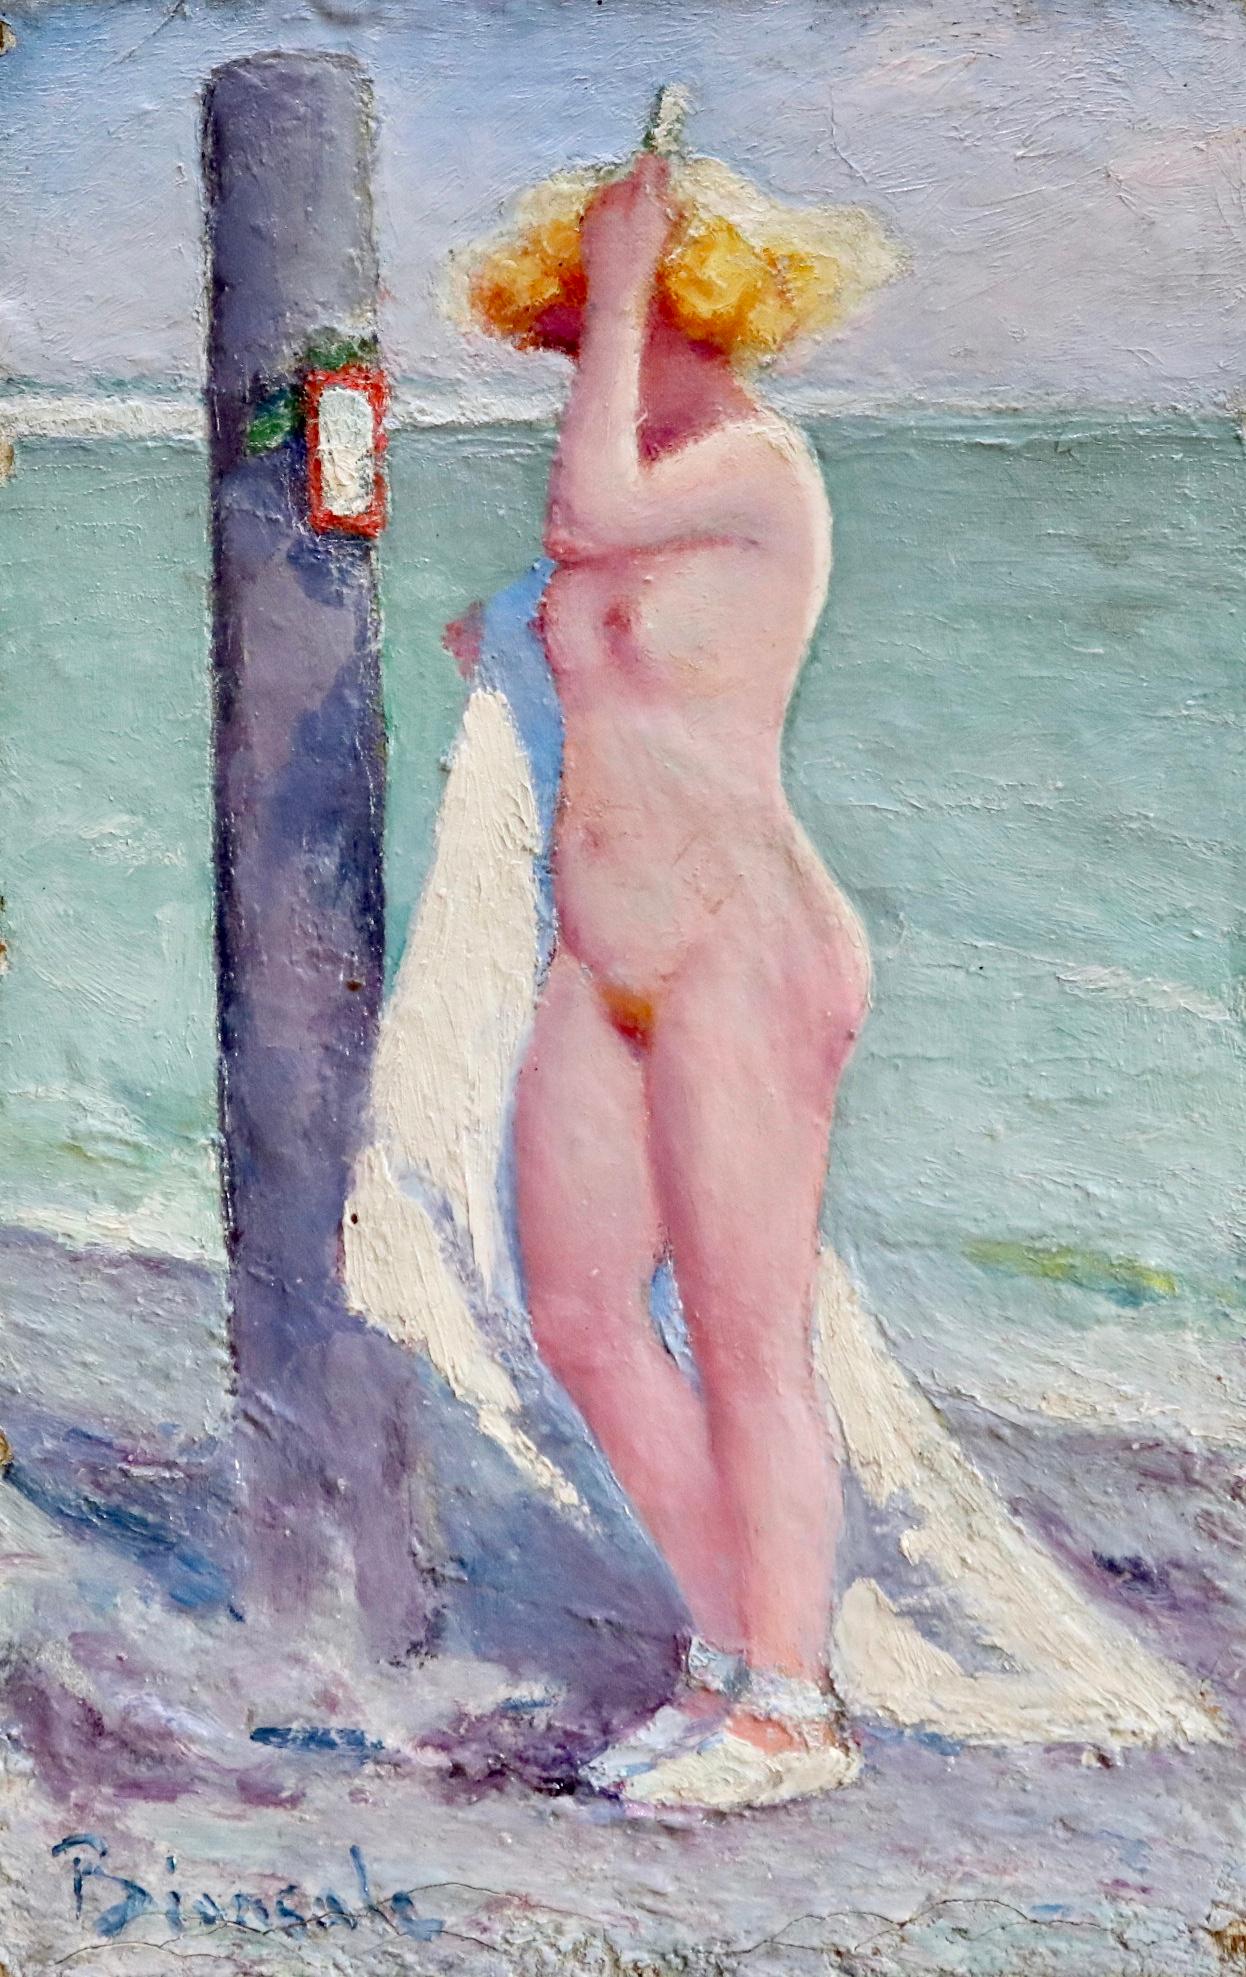 20th century oil on paper panel by Italian painter Bernardo Biancale depicting a nude blonde standing on the beach brushing her hair. Signed lower left. This painting is not currently framed but a suitable frame can be sourced if